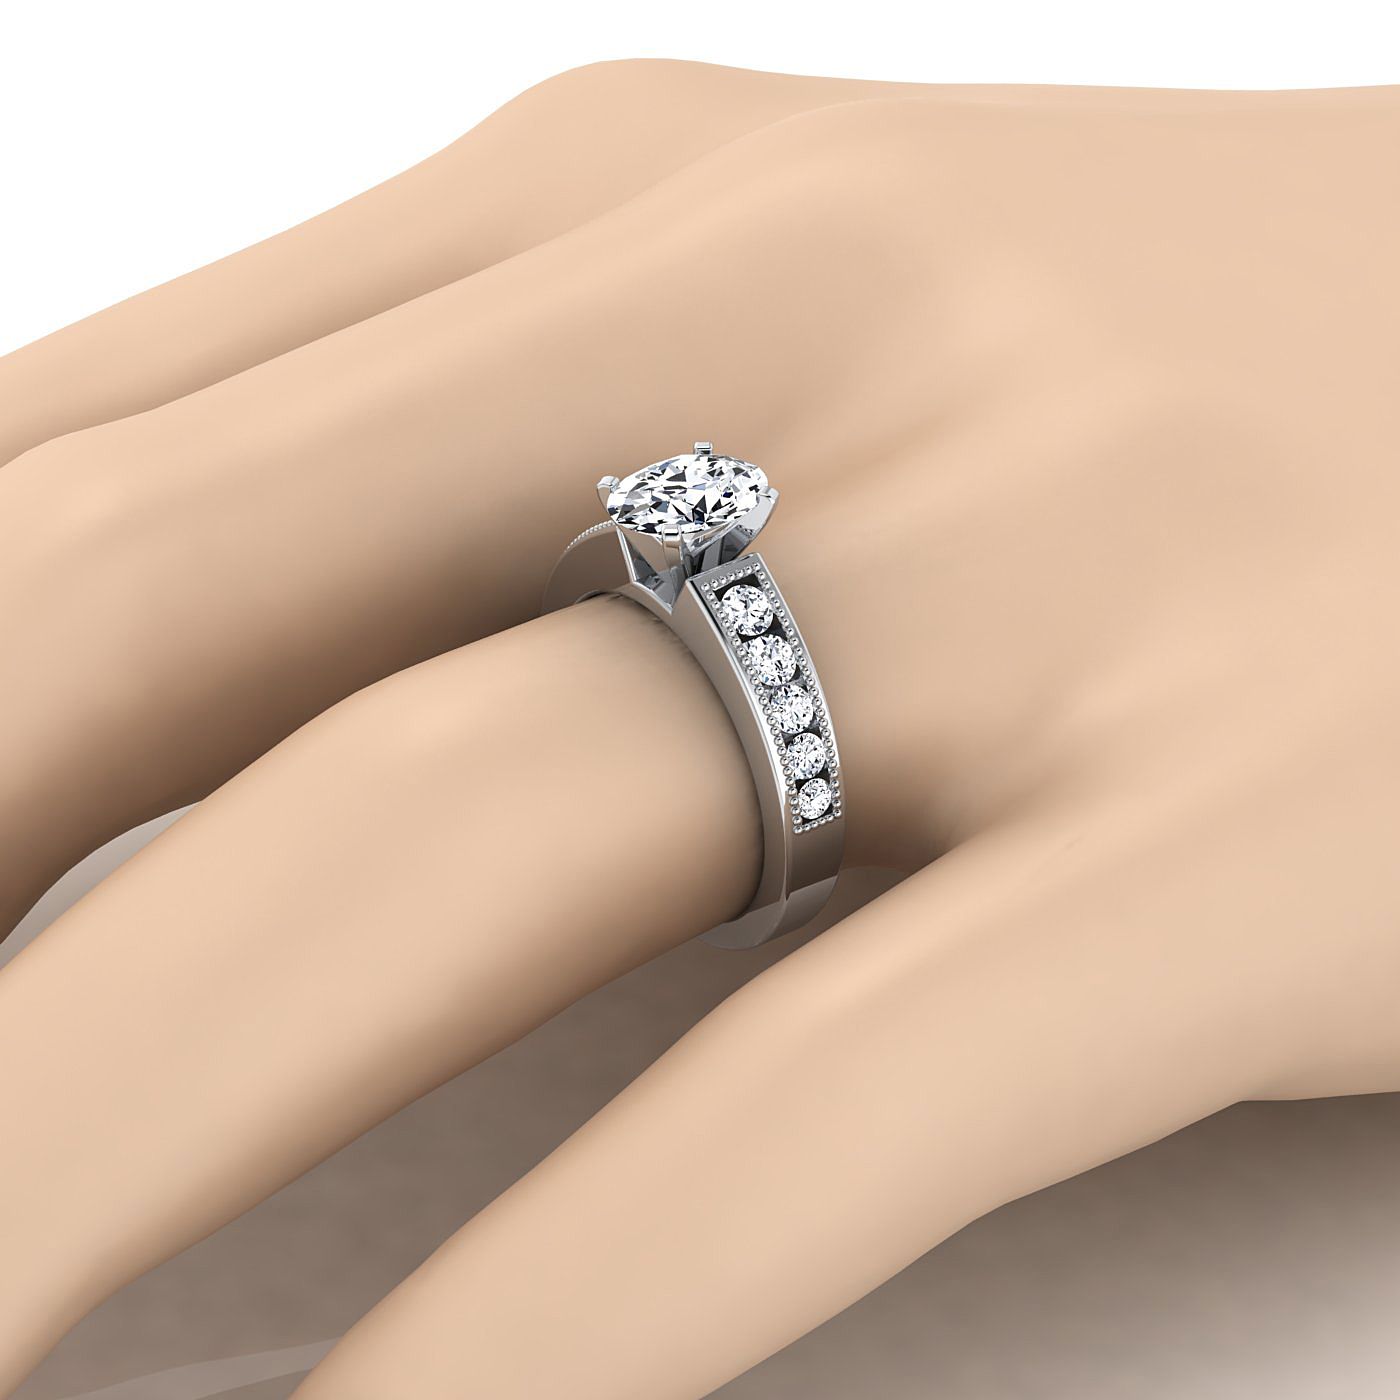 18K White Gold Oval Diamond Antique Milgrain Bead and Channel Set Engagement Ring -1/2ctw